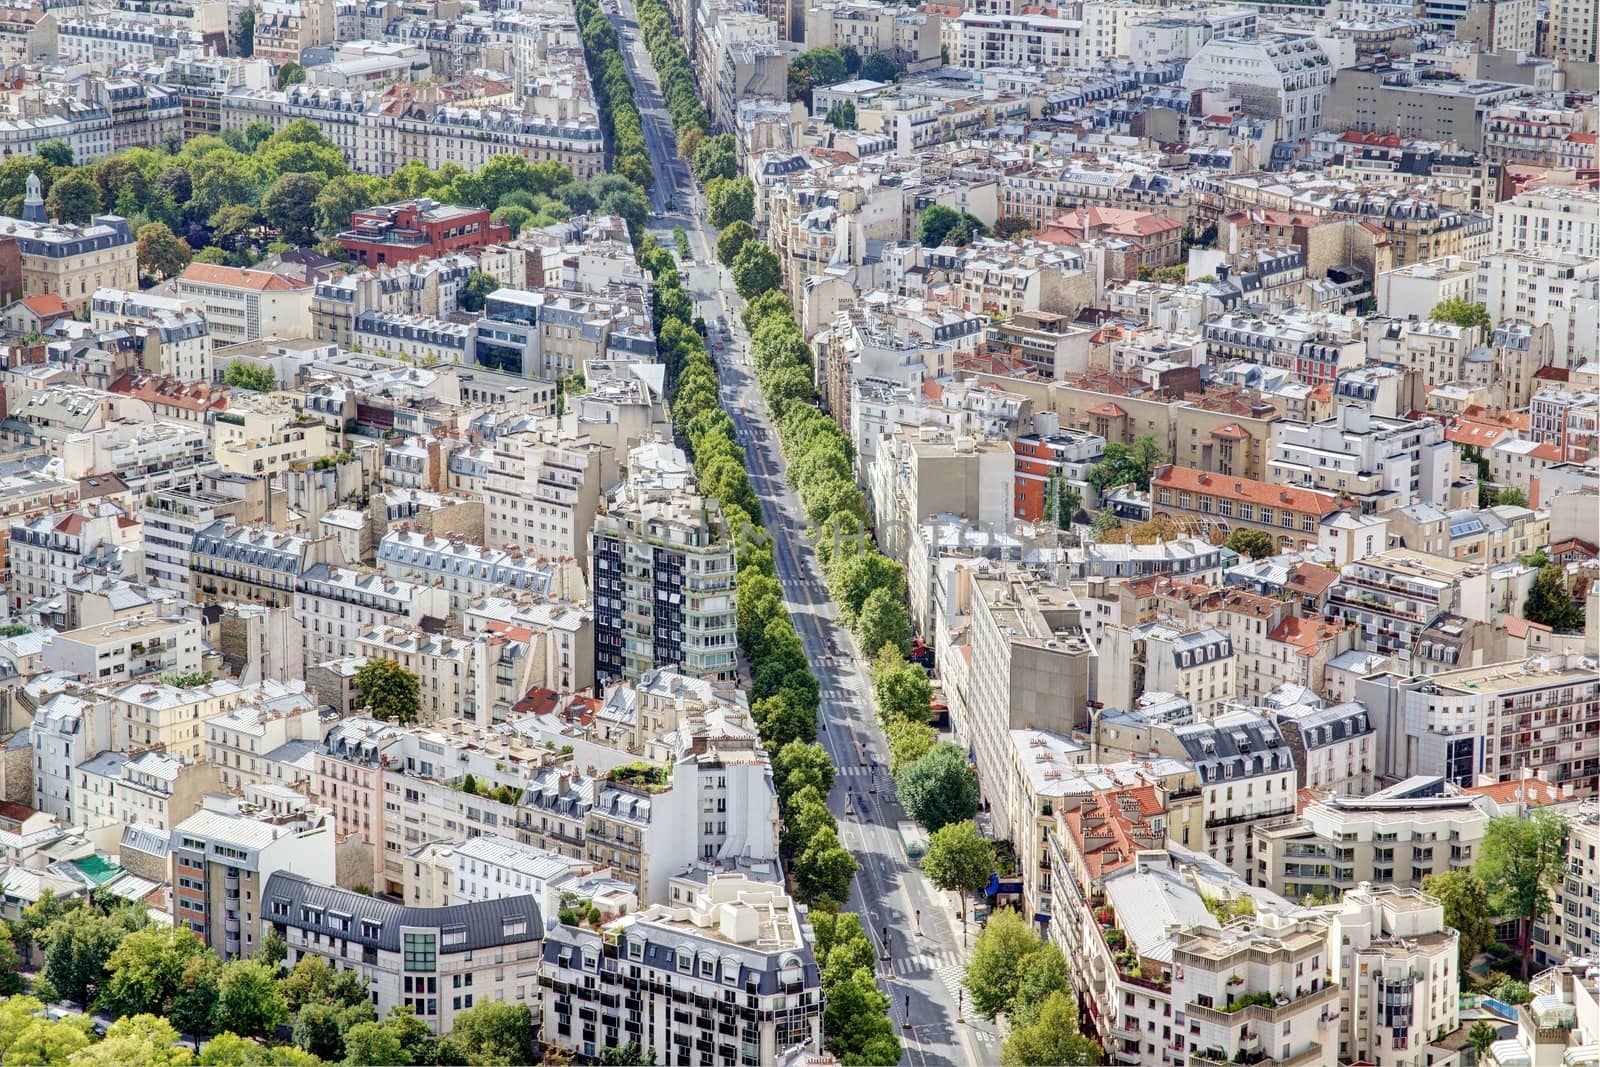 Photo shows Parisian cityscape taken on the skyscraper with various houses and monuments.